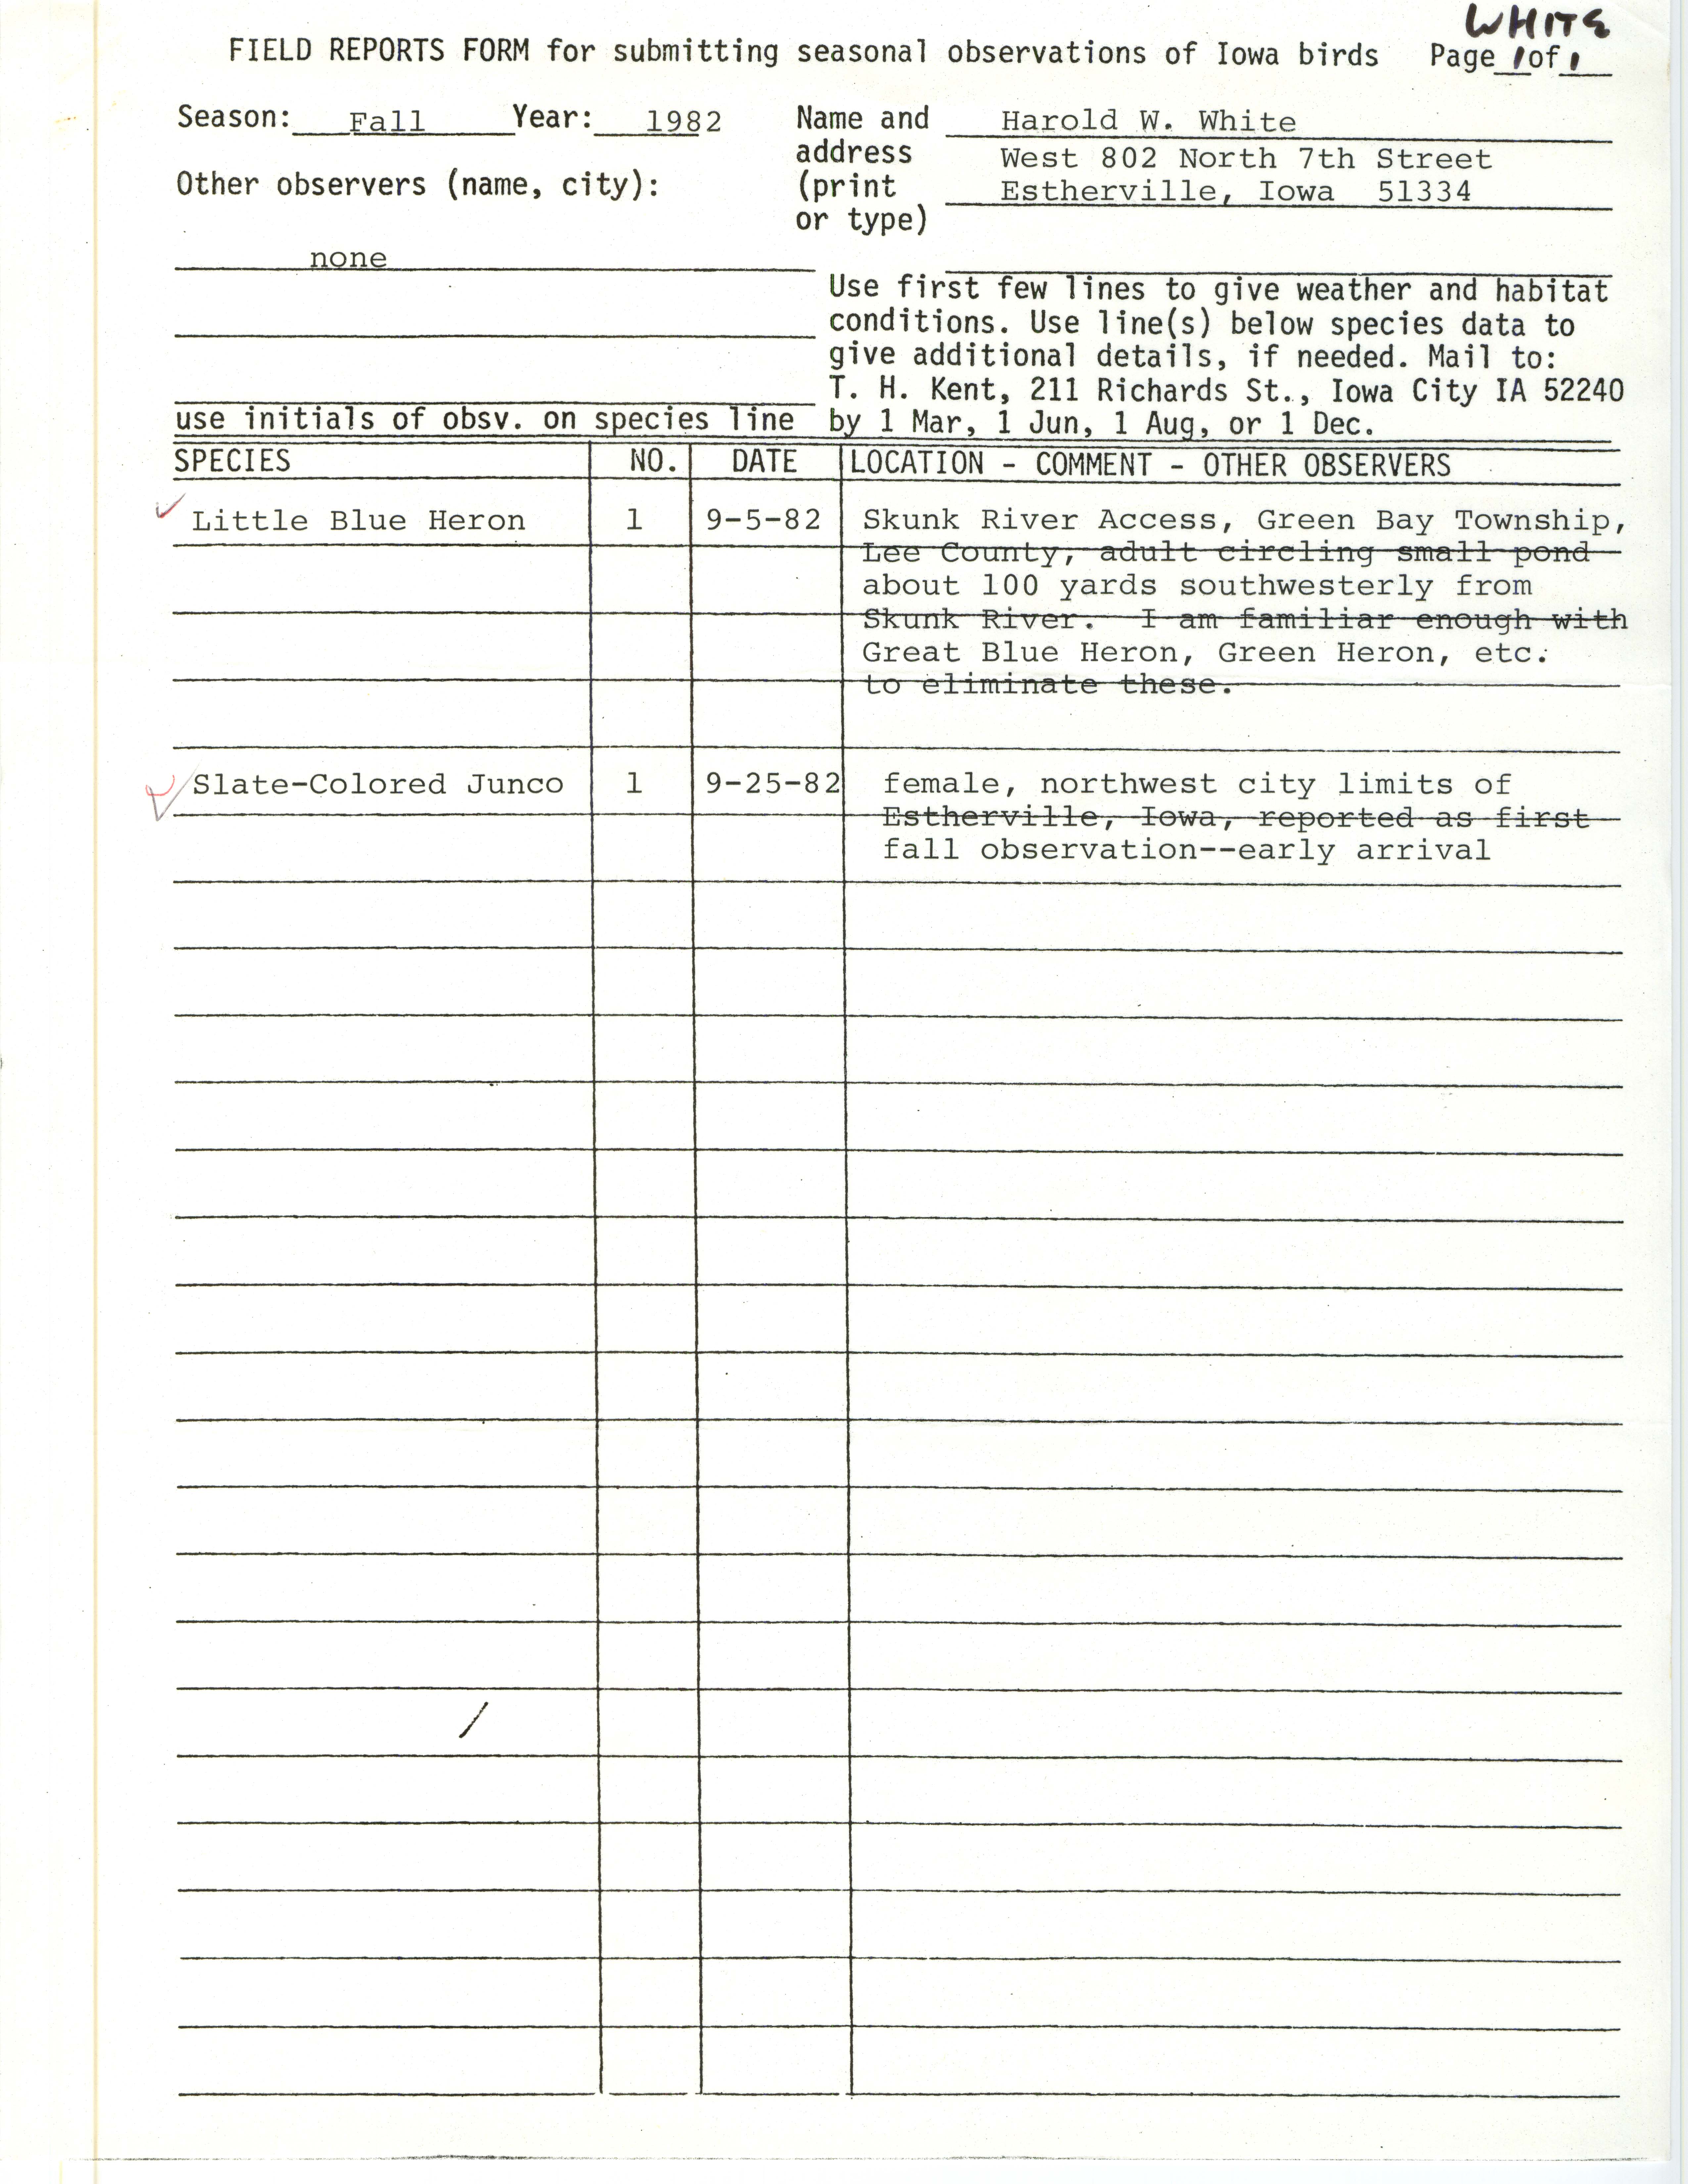 Field notes contributed by Harold W. White, fall 1982